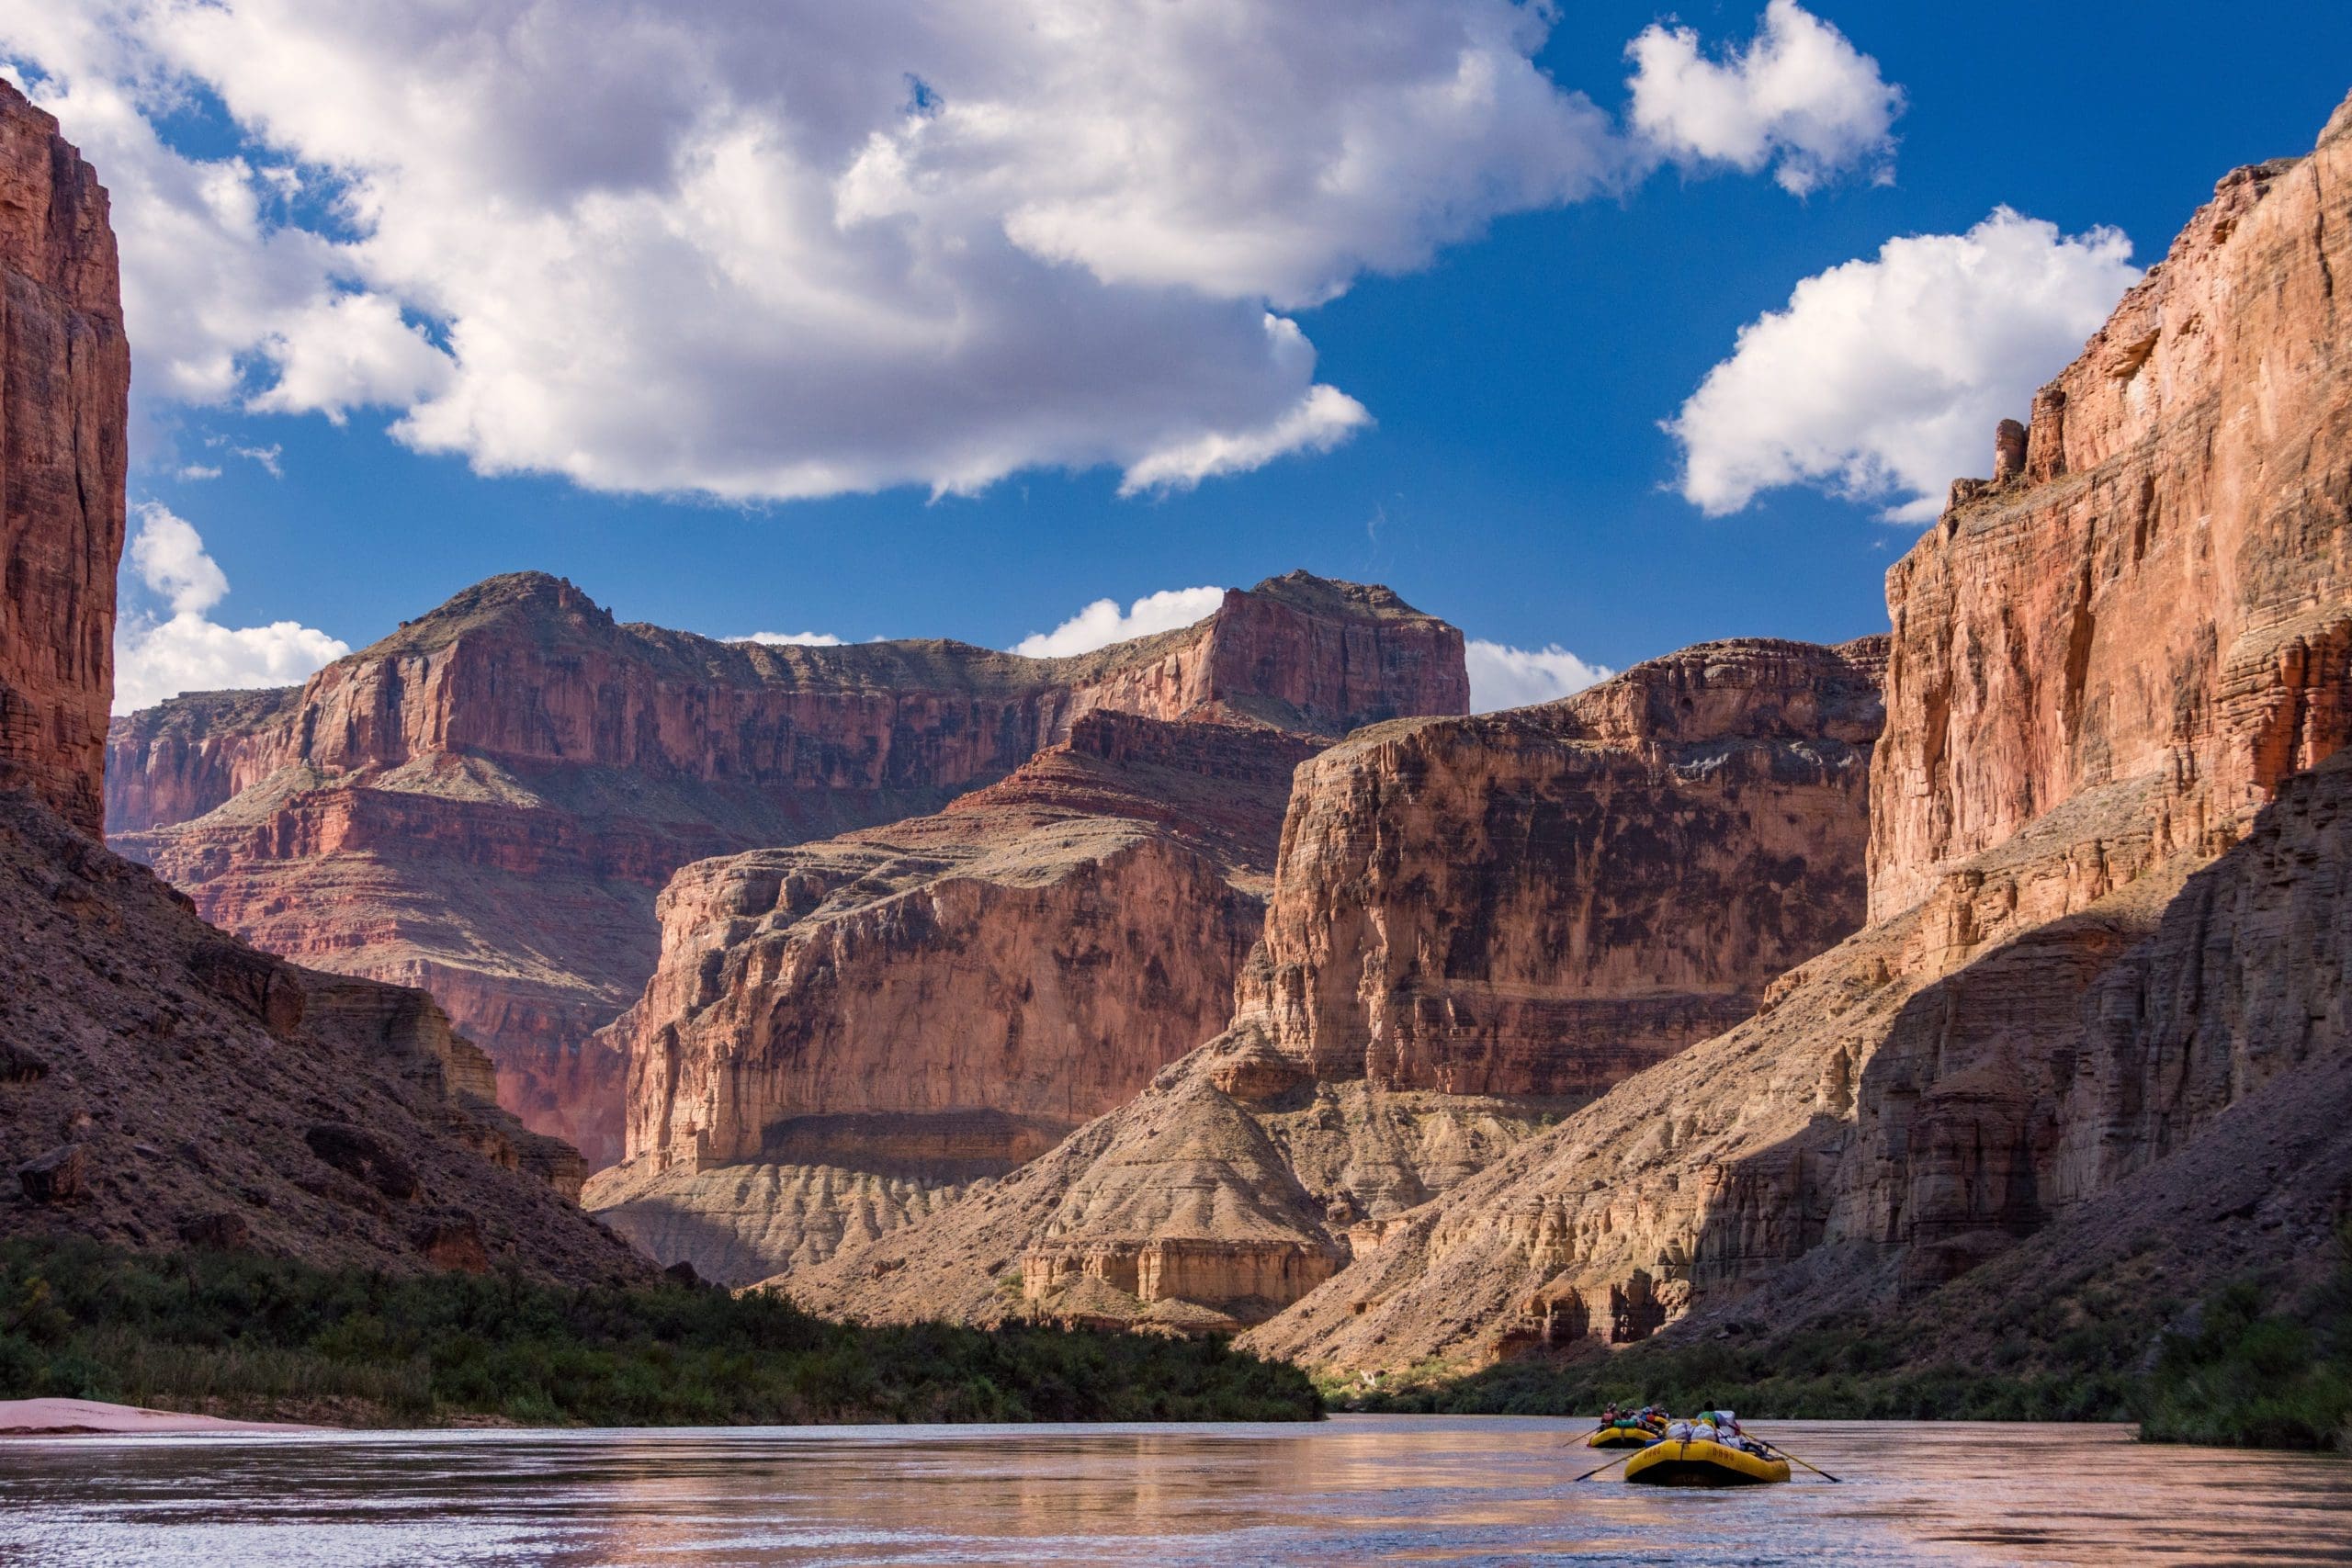 Rafting down the Colorado River through the Grand Canyon | 11 Ideas For A Bucket List Vacation In The USA